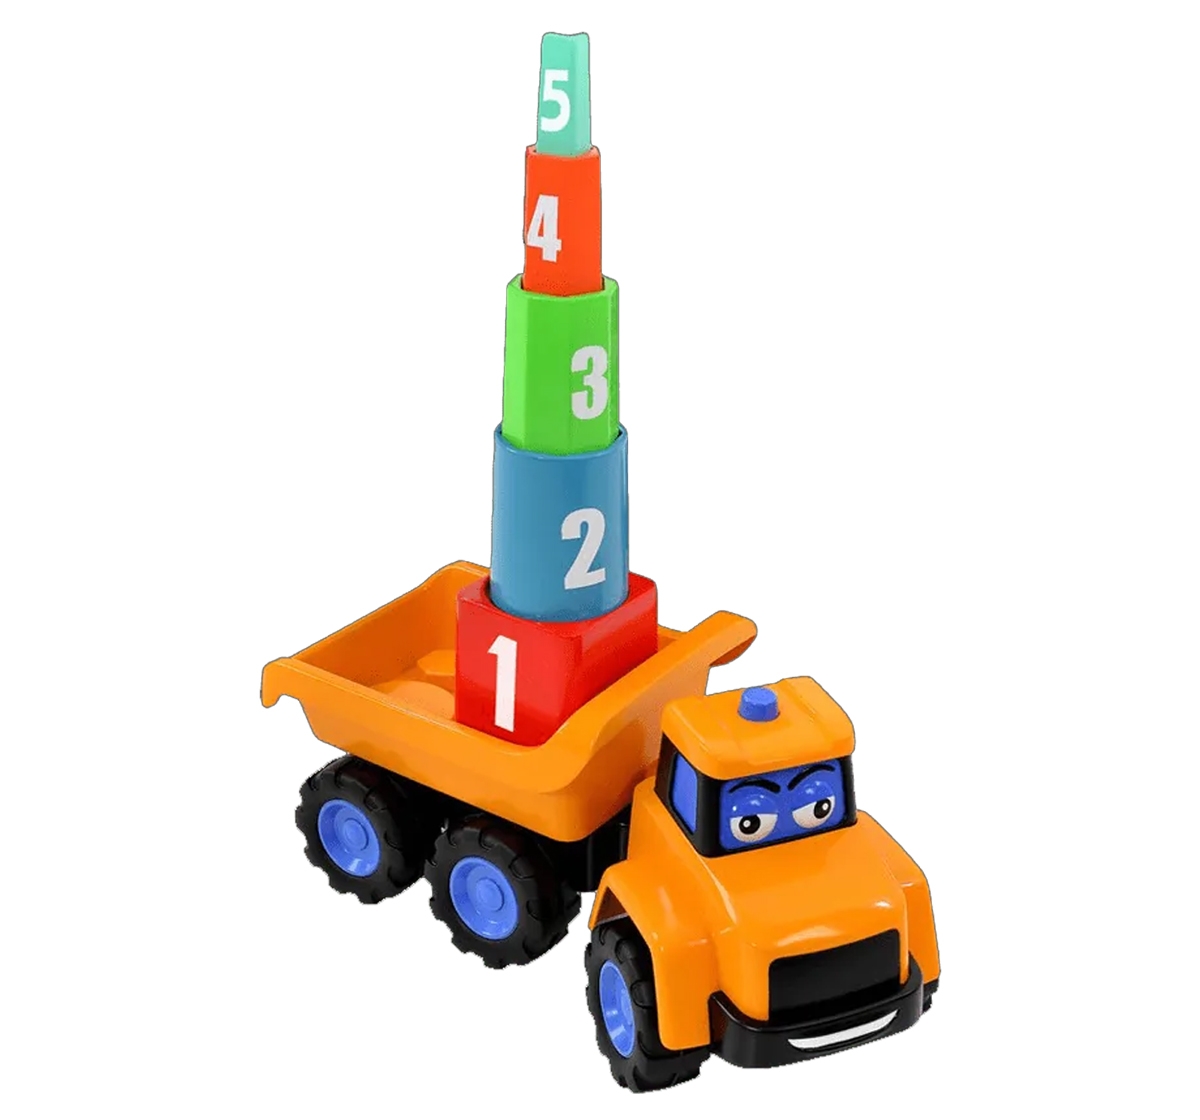 JCB My First stacking Stanley Mega Truck Construction Toys for kids 12M+, Multicolour